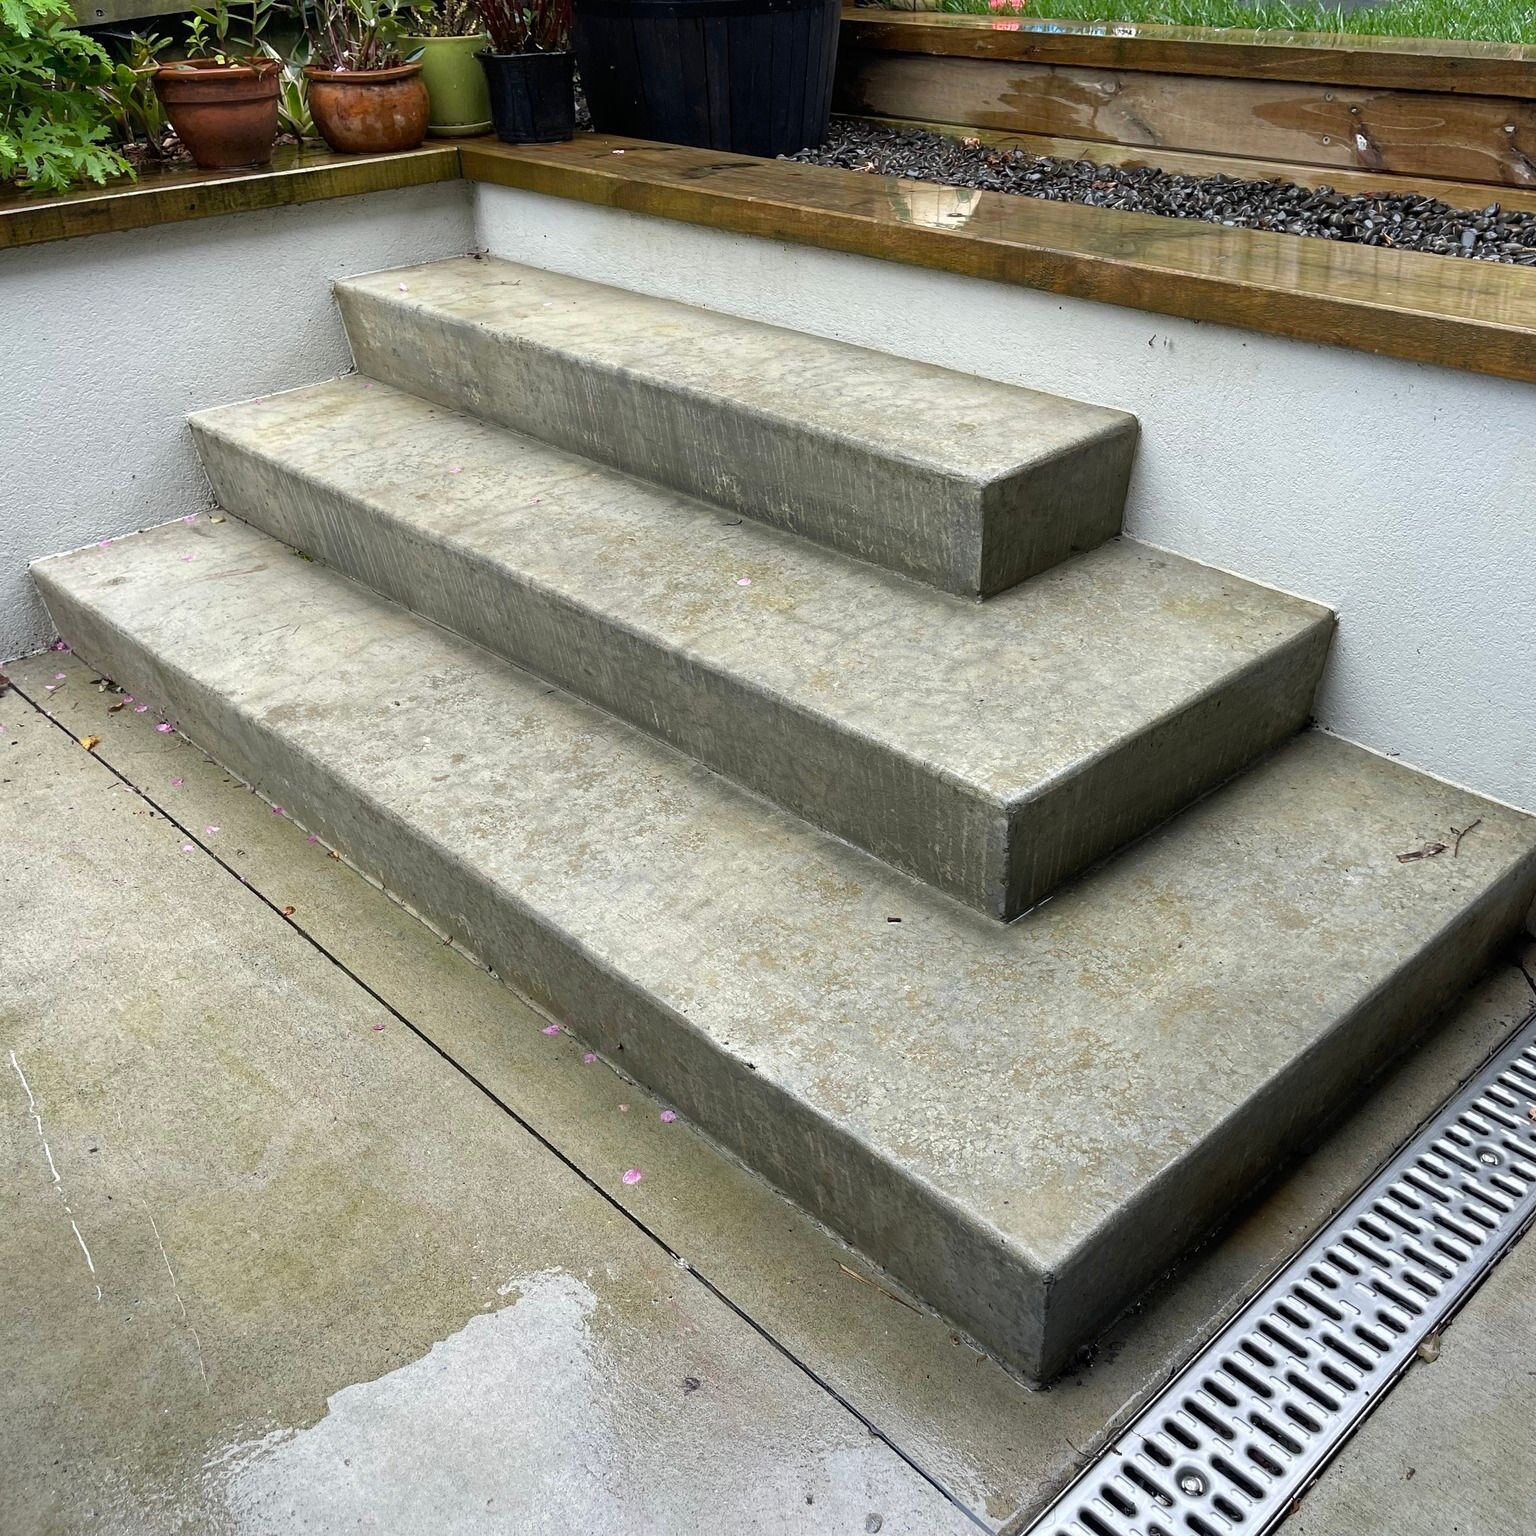 Another set of concrete steps from start to finish 👍